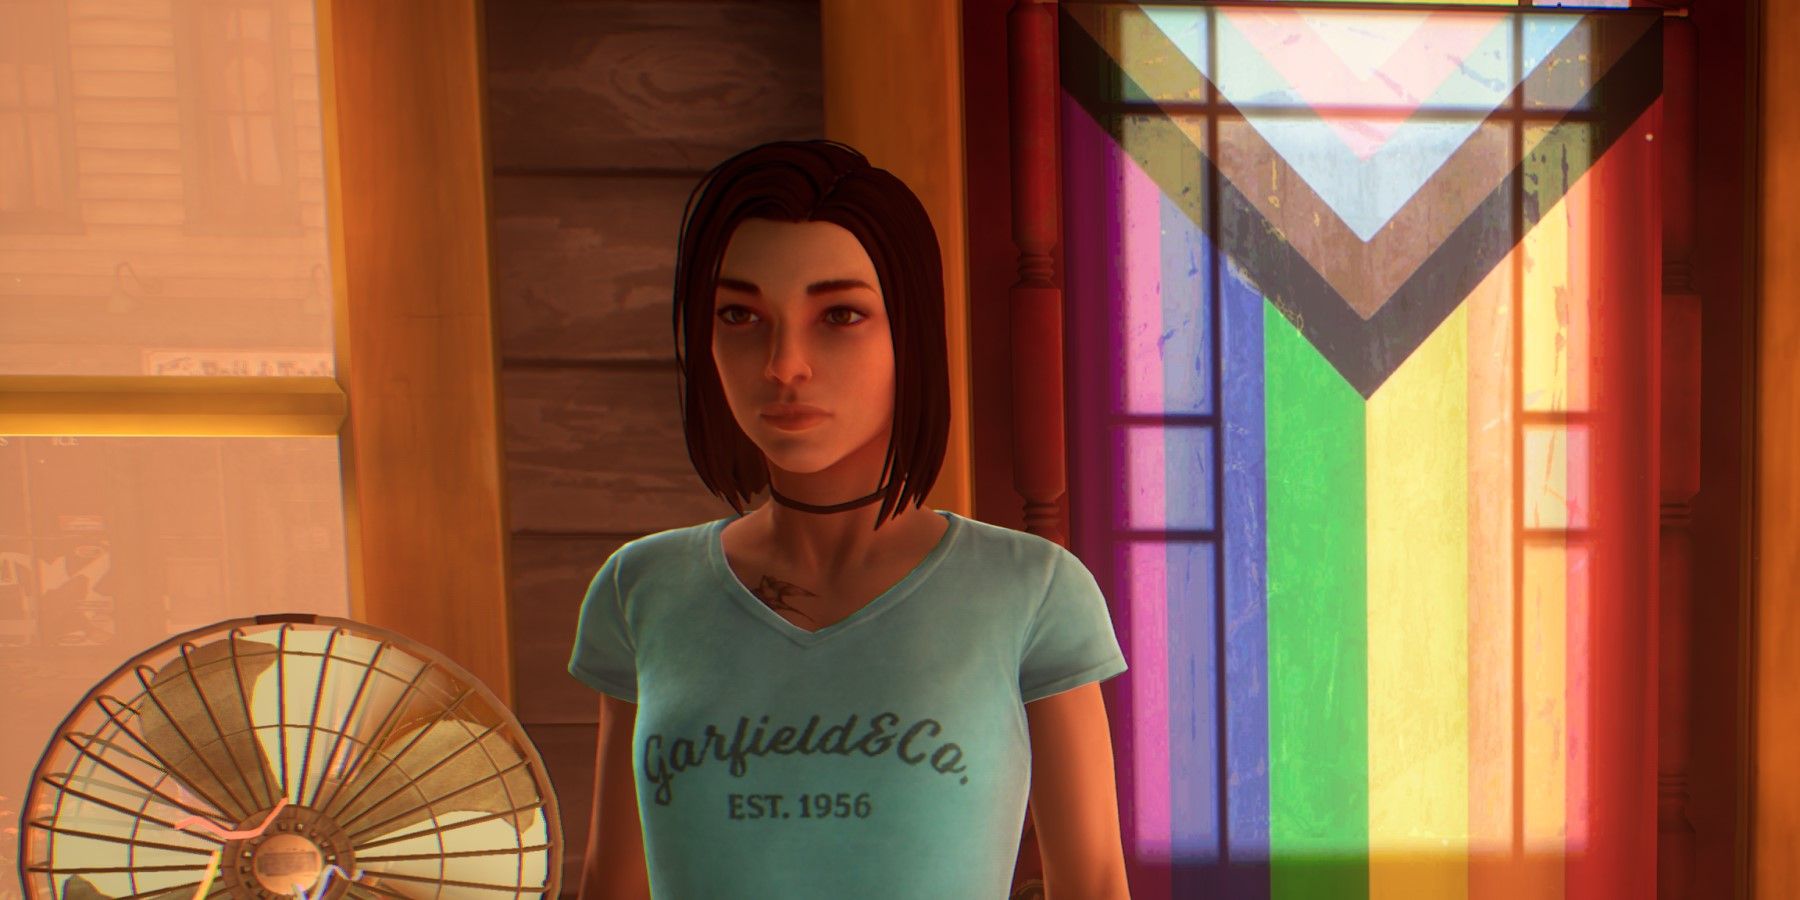 Life is Strange: True Colors Wavelengths brings Steph's story full circle,  and I can't stop thinking about it